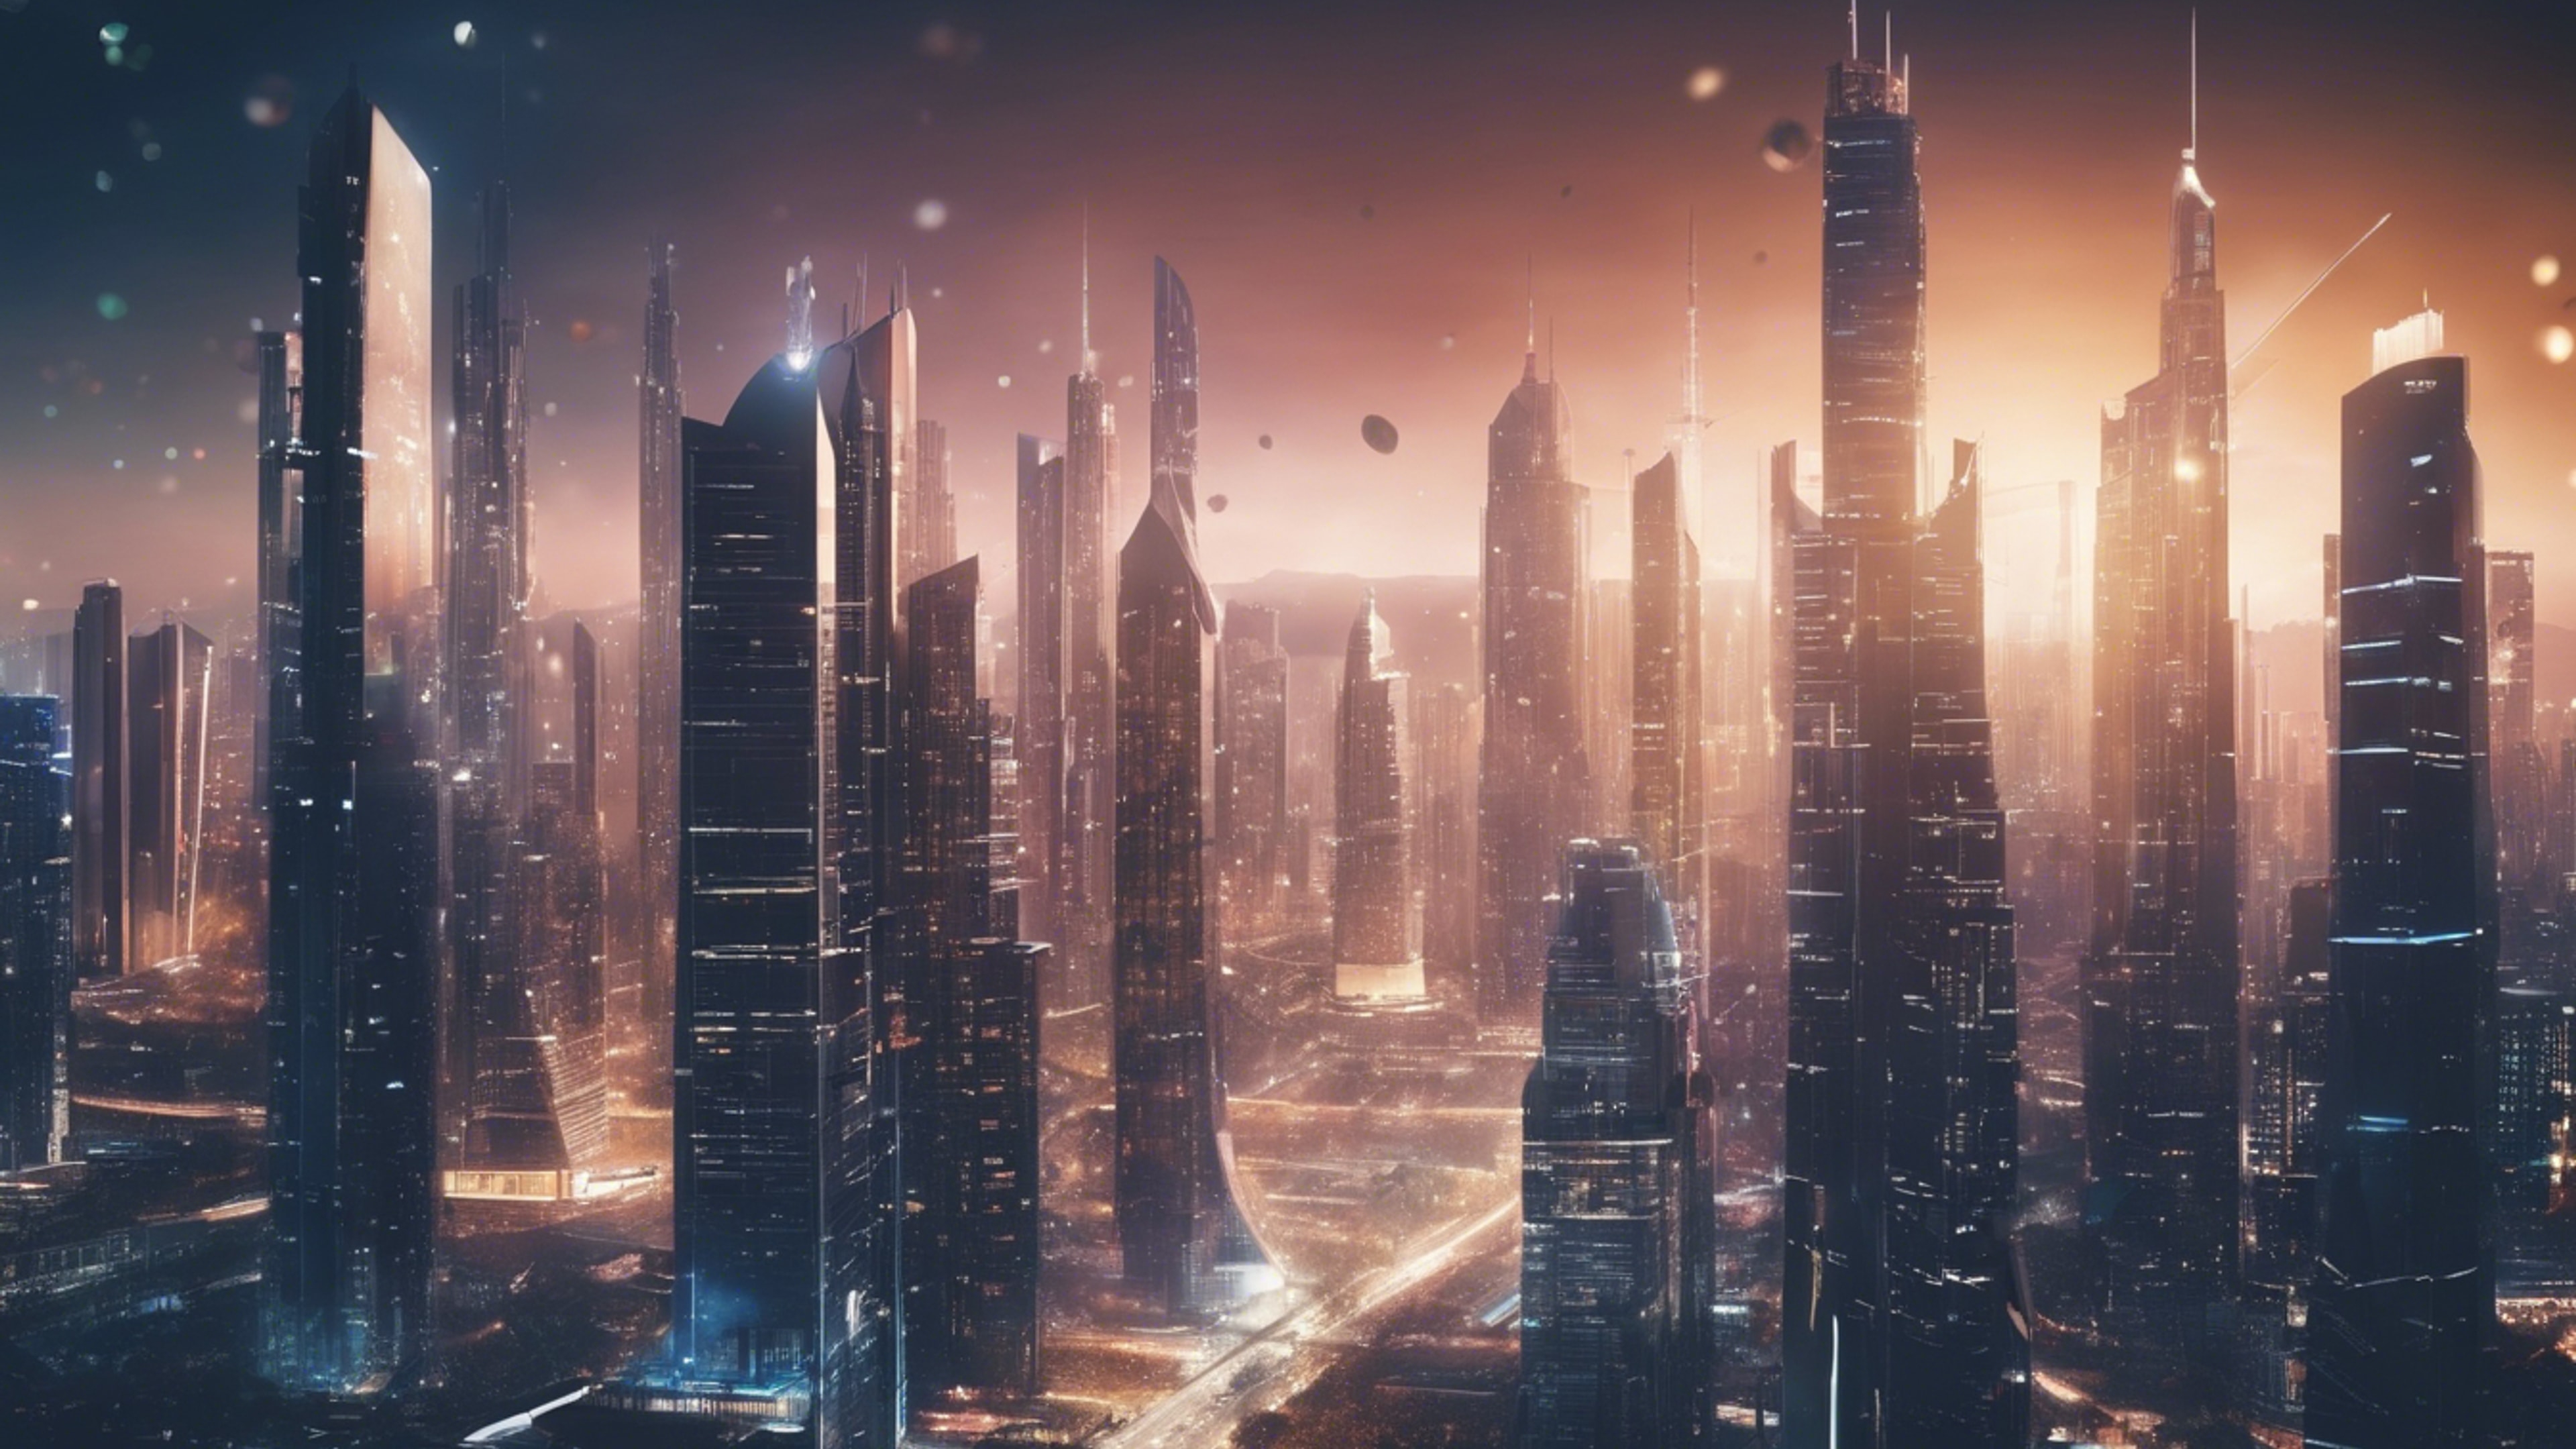 A detailed illustration of a megalopolis skyline with futuristic, AI-designed structures. Tapet[5acce17a495b4f288757]